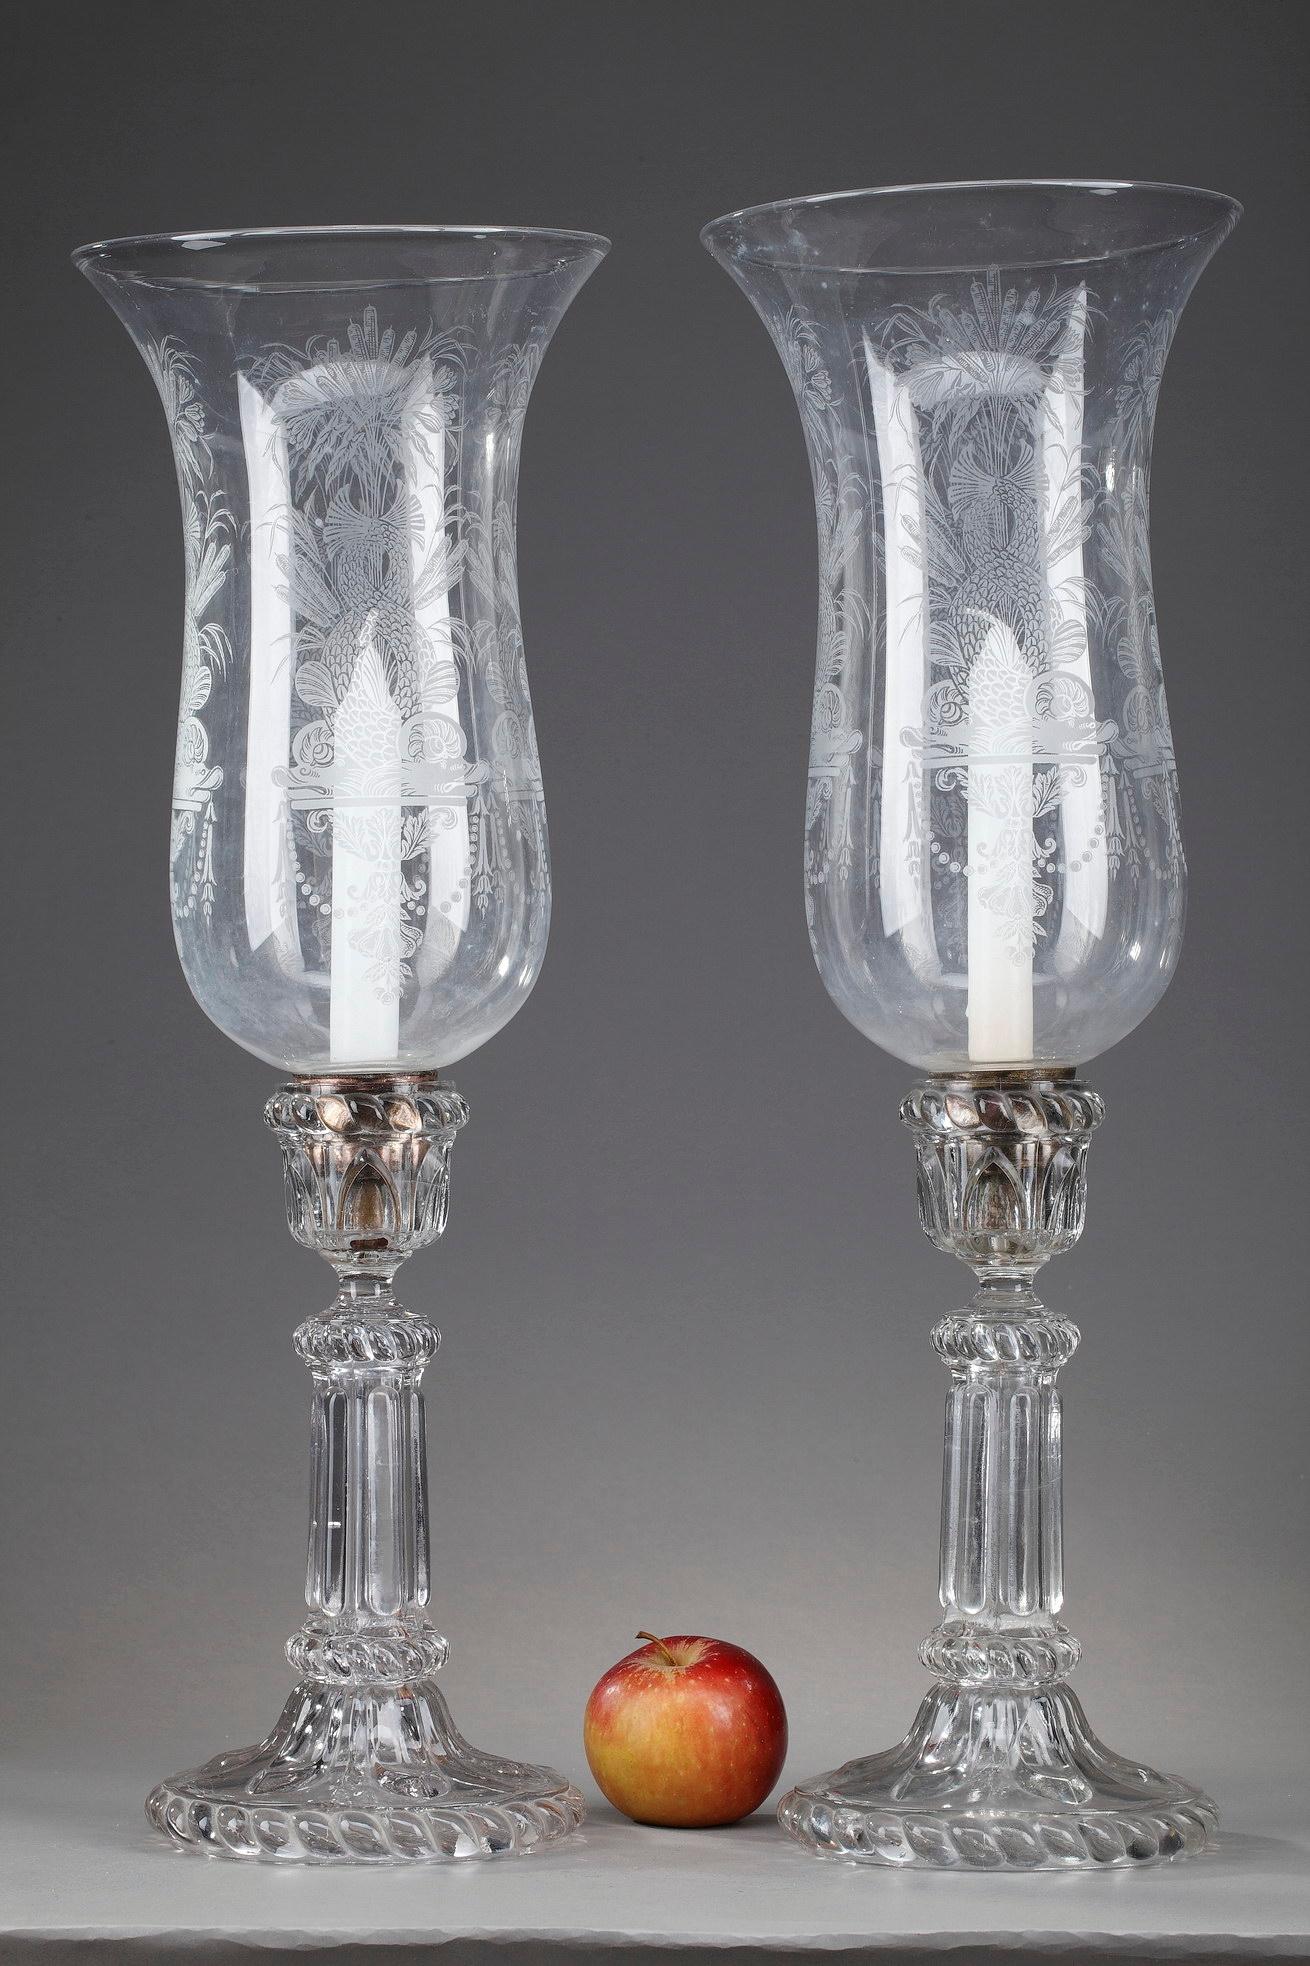 This monumentally-sized pair of crystal candleholders was executed by the French glassmaker Portieux (1705-2012). Crafted in the early 20th century, they are intricately engraved with dolphins, vases and foliage. Each lamp is resting on a fluded